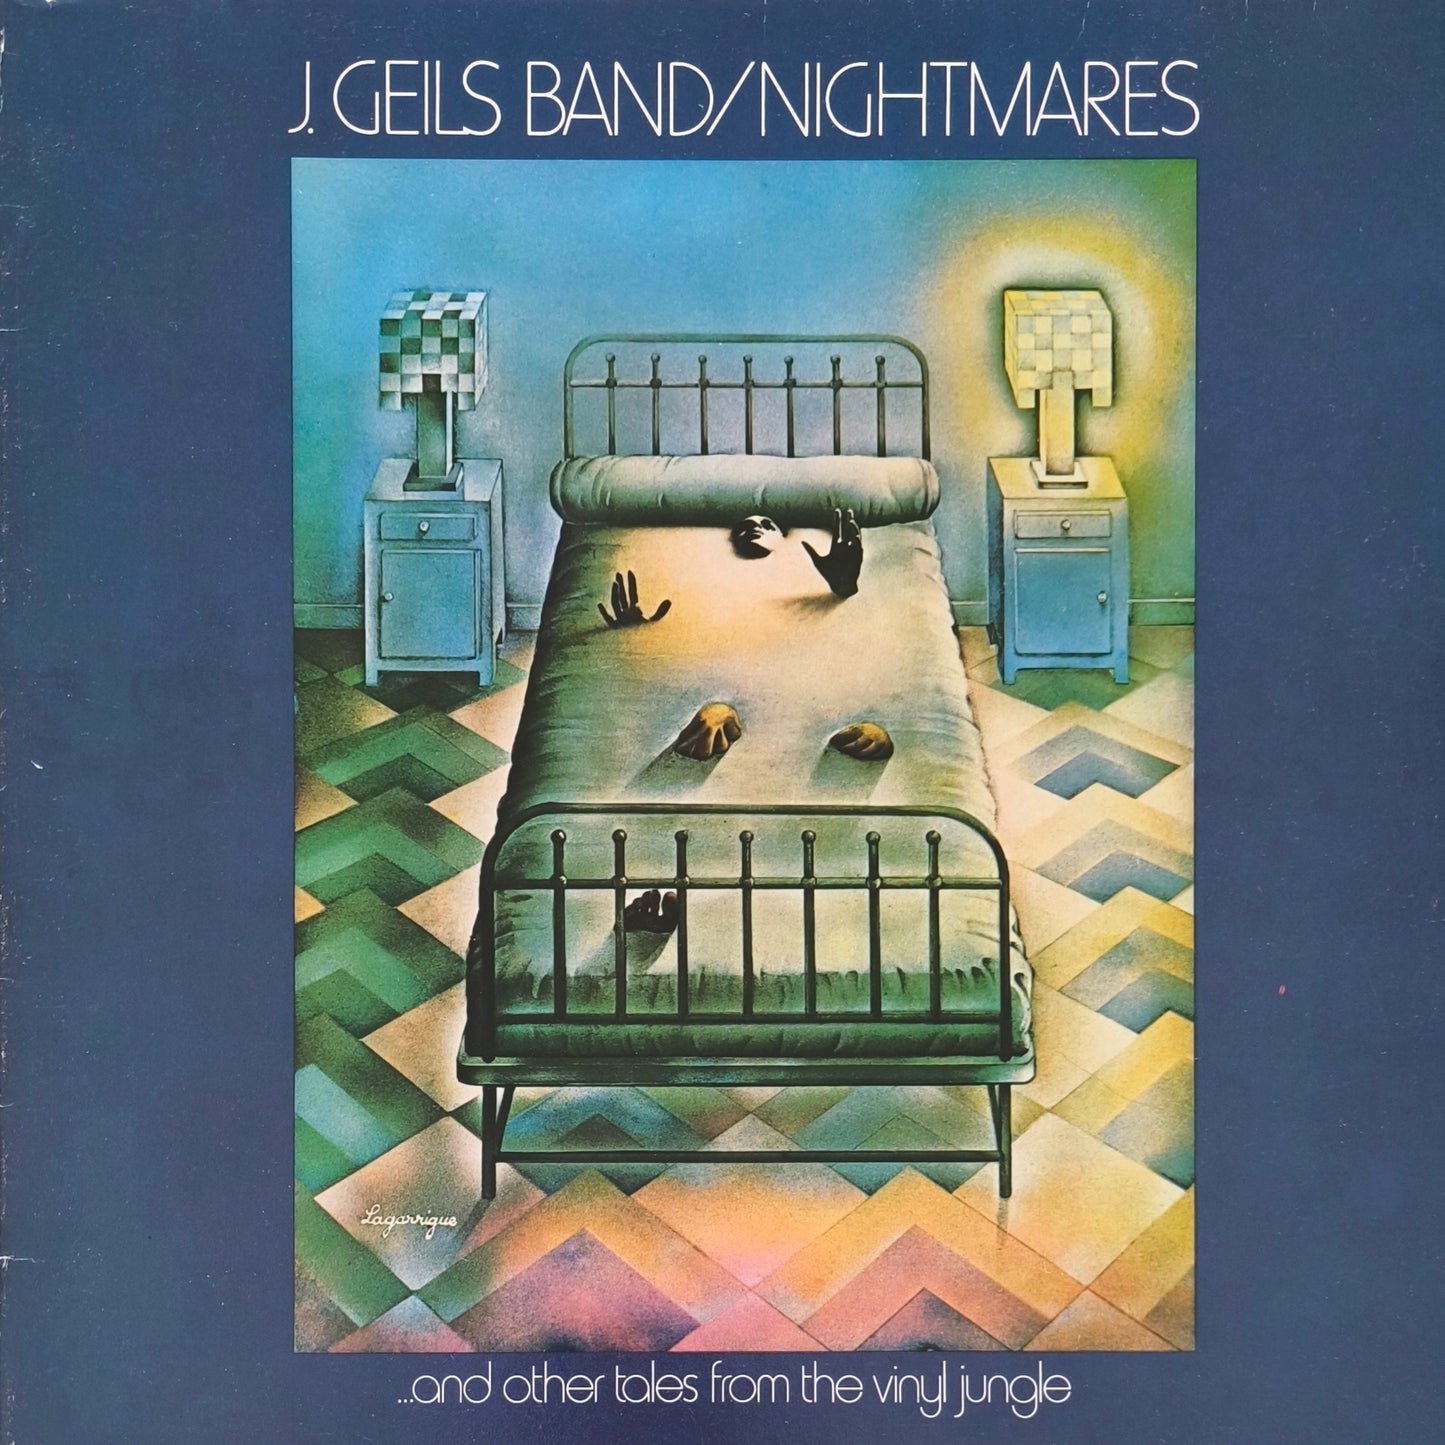 J. GEILS BAND - Nightmares ...And Other Tales From The Vinyl Jungle